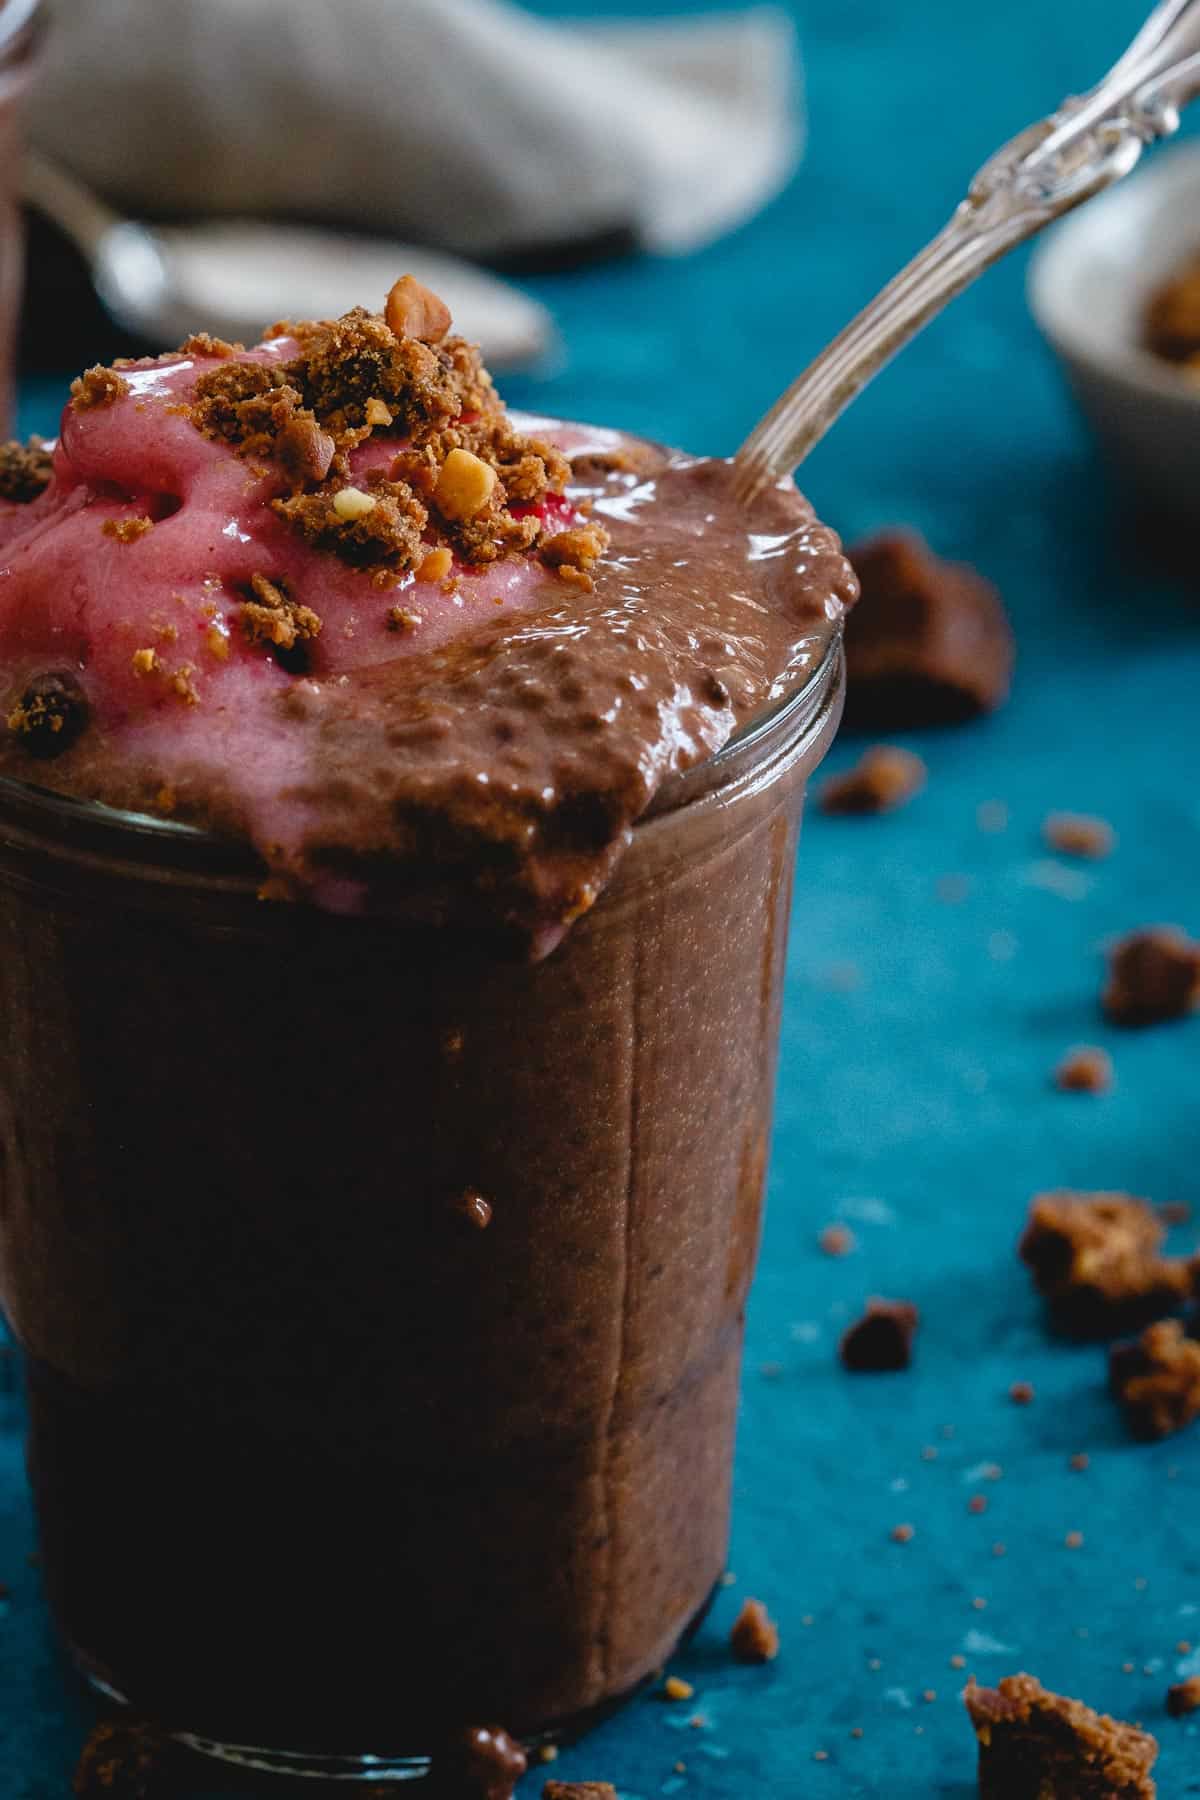 Snack healthy with this peanut butter chocolate chia parfait. Peanut butter chocolate crumbles and whipped frozen strawberries take it over the edge!